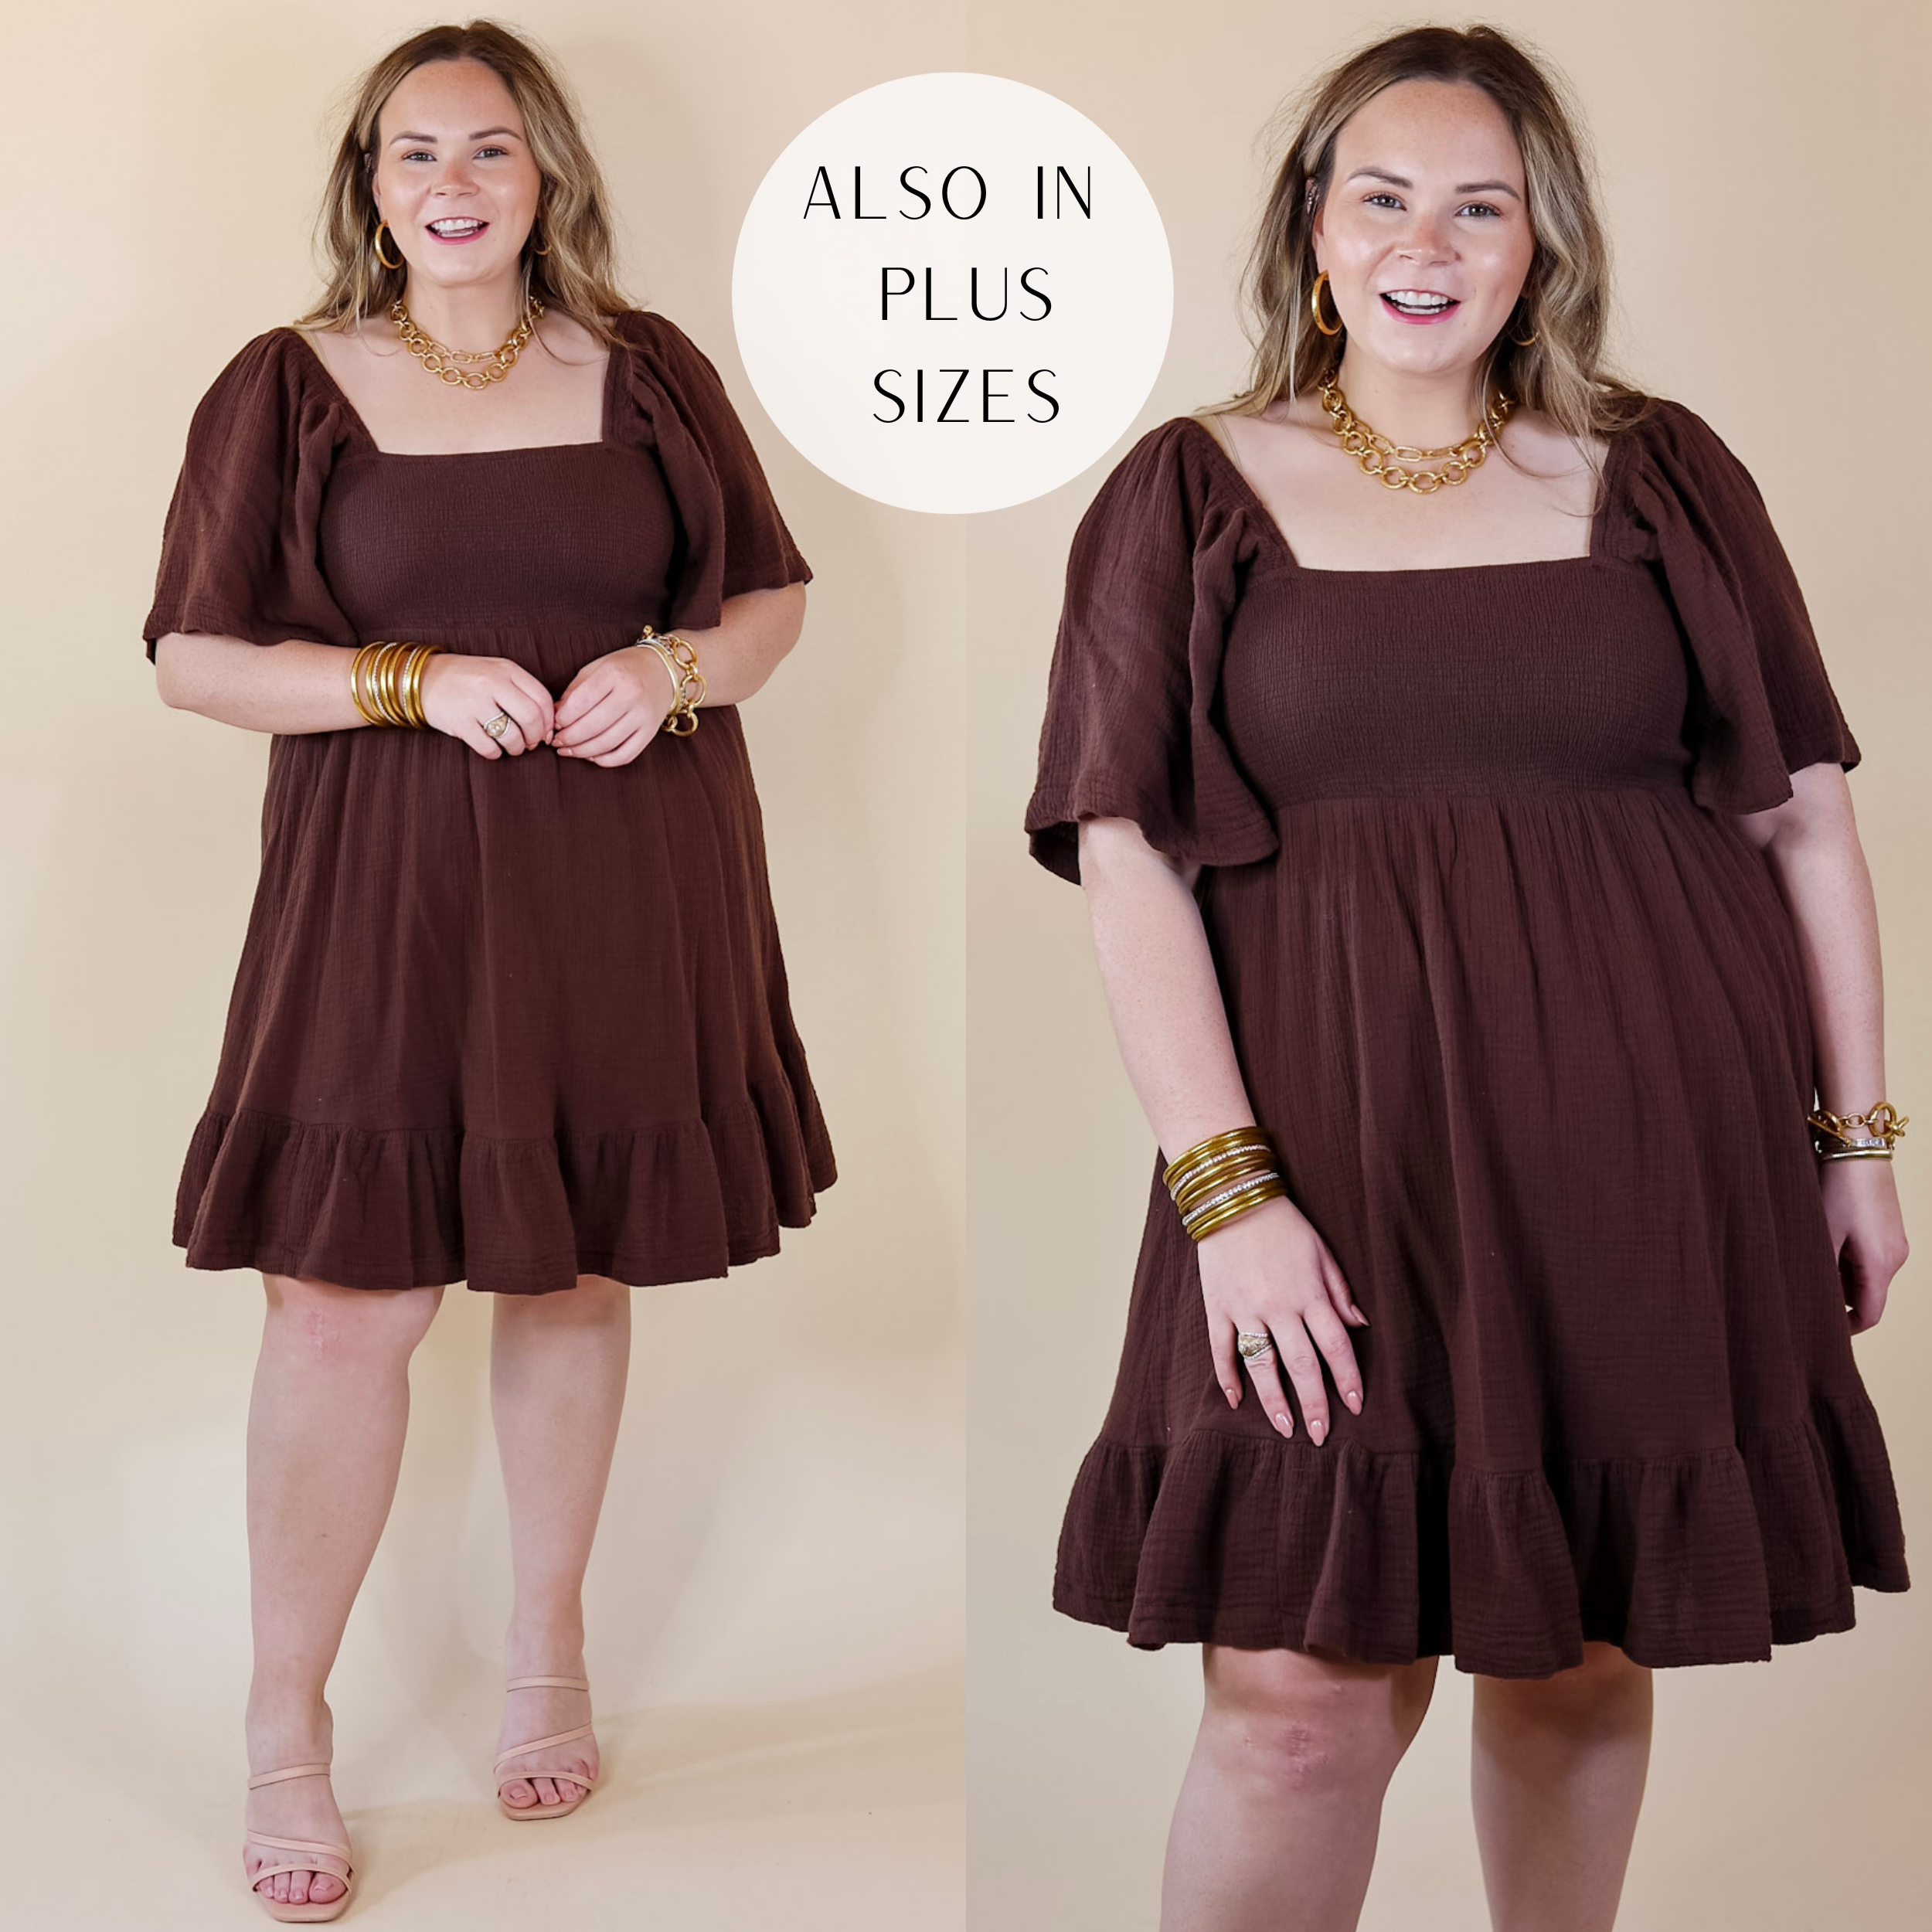 Model is wearing a ruffle hem dress in brown with gold accessories